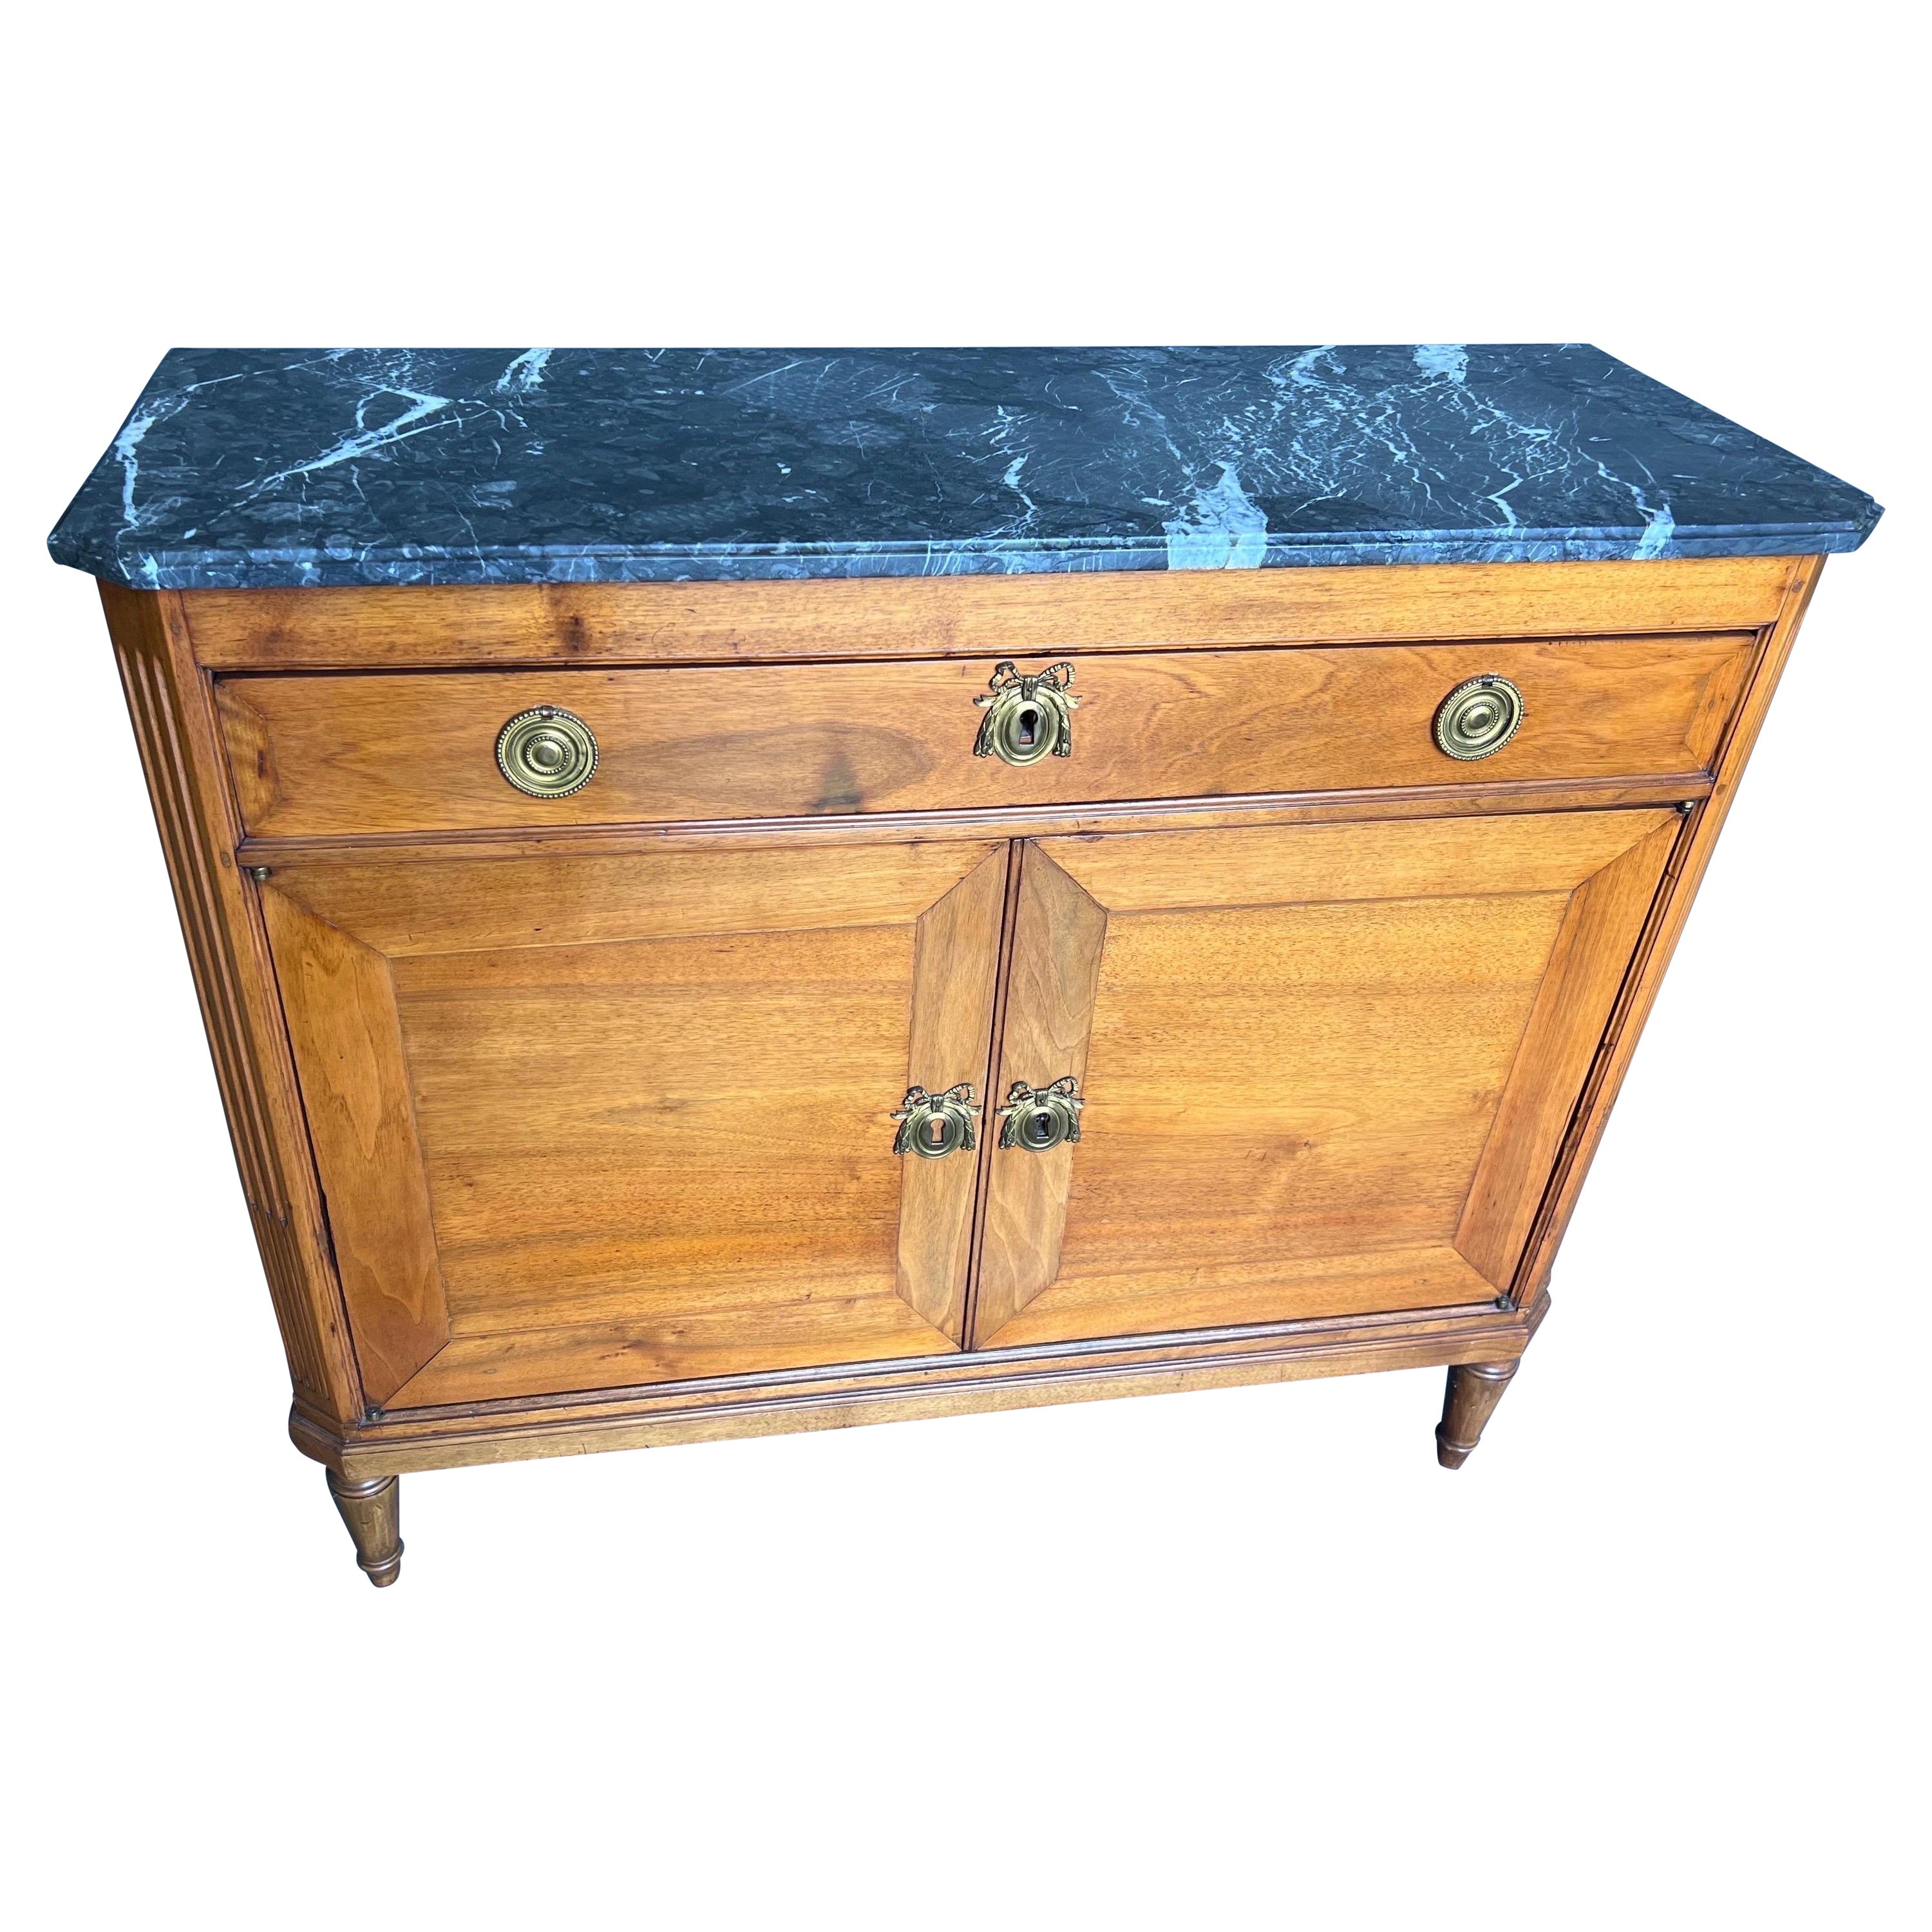 Early 19th Century French or Baltic Neoclassical Marble Top Cabinet